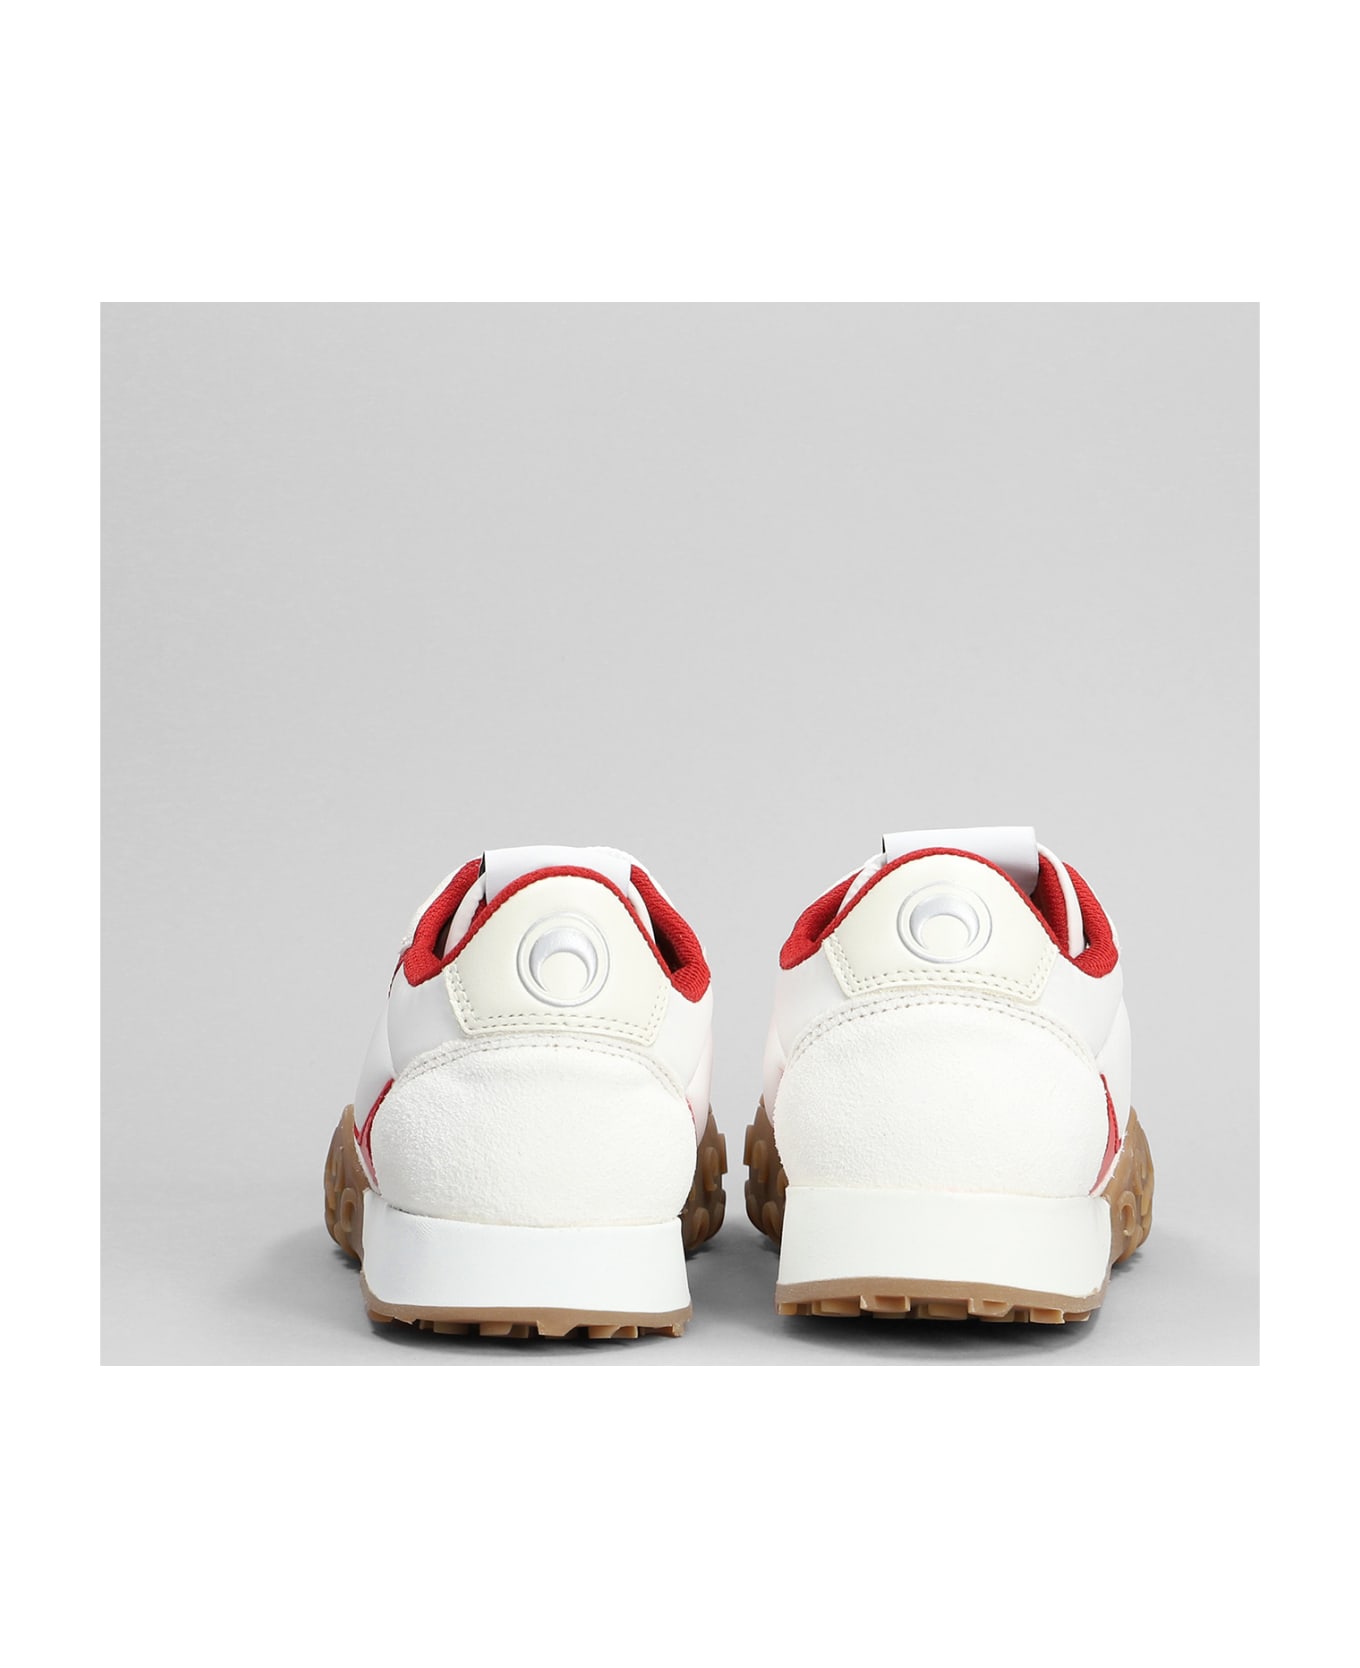 Marine Serre Ms Rise 22 Sneakers In White Suede And Fabric - white